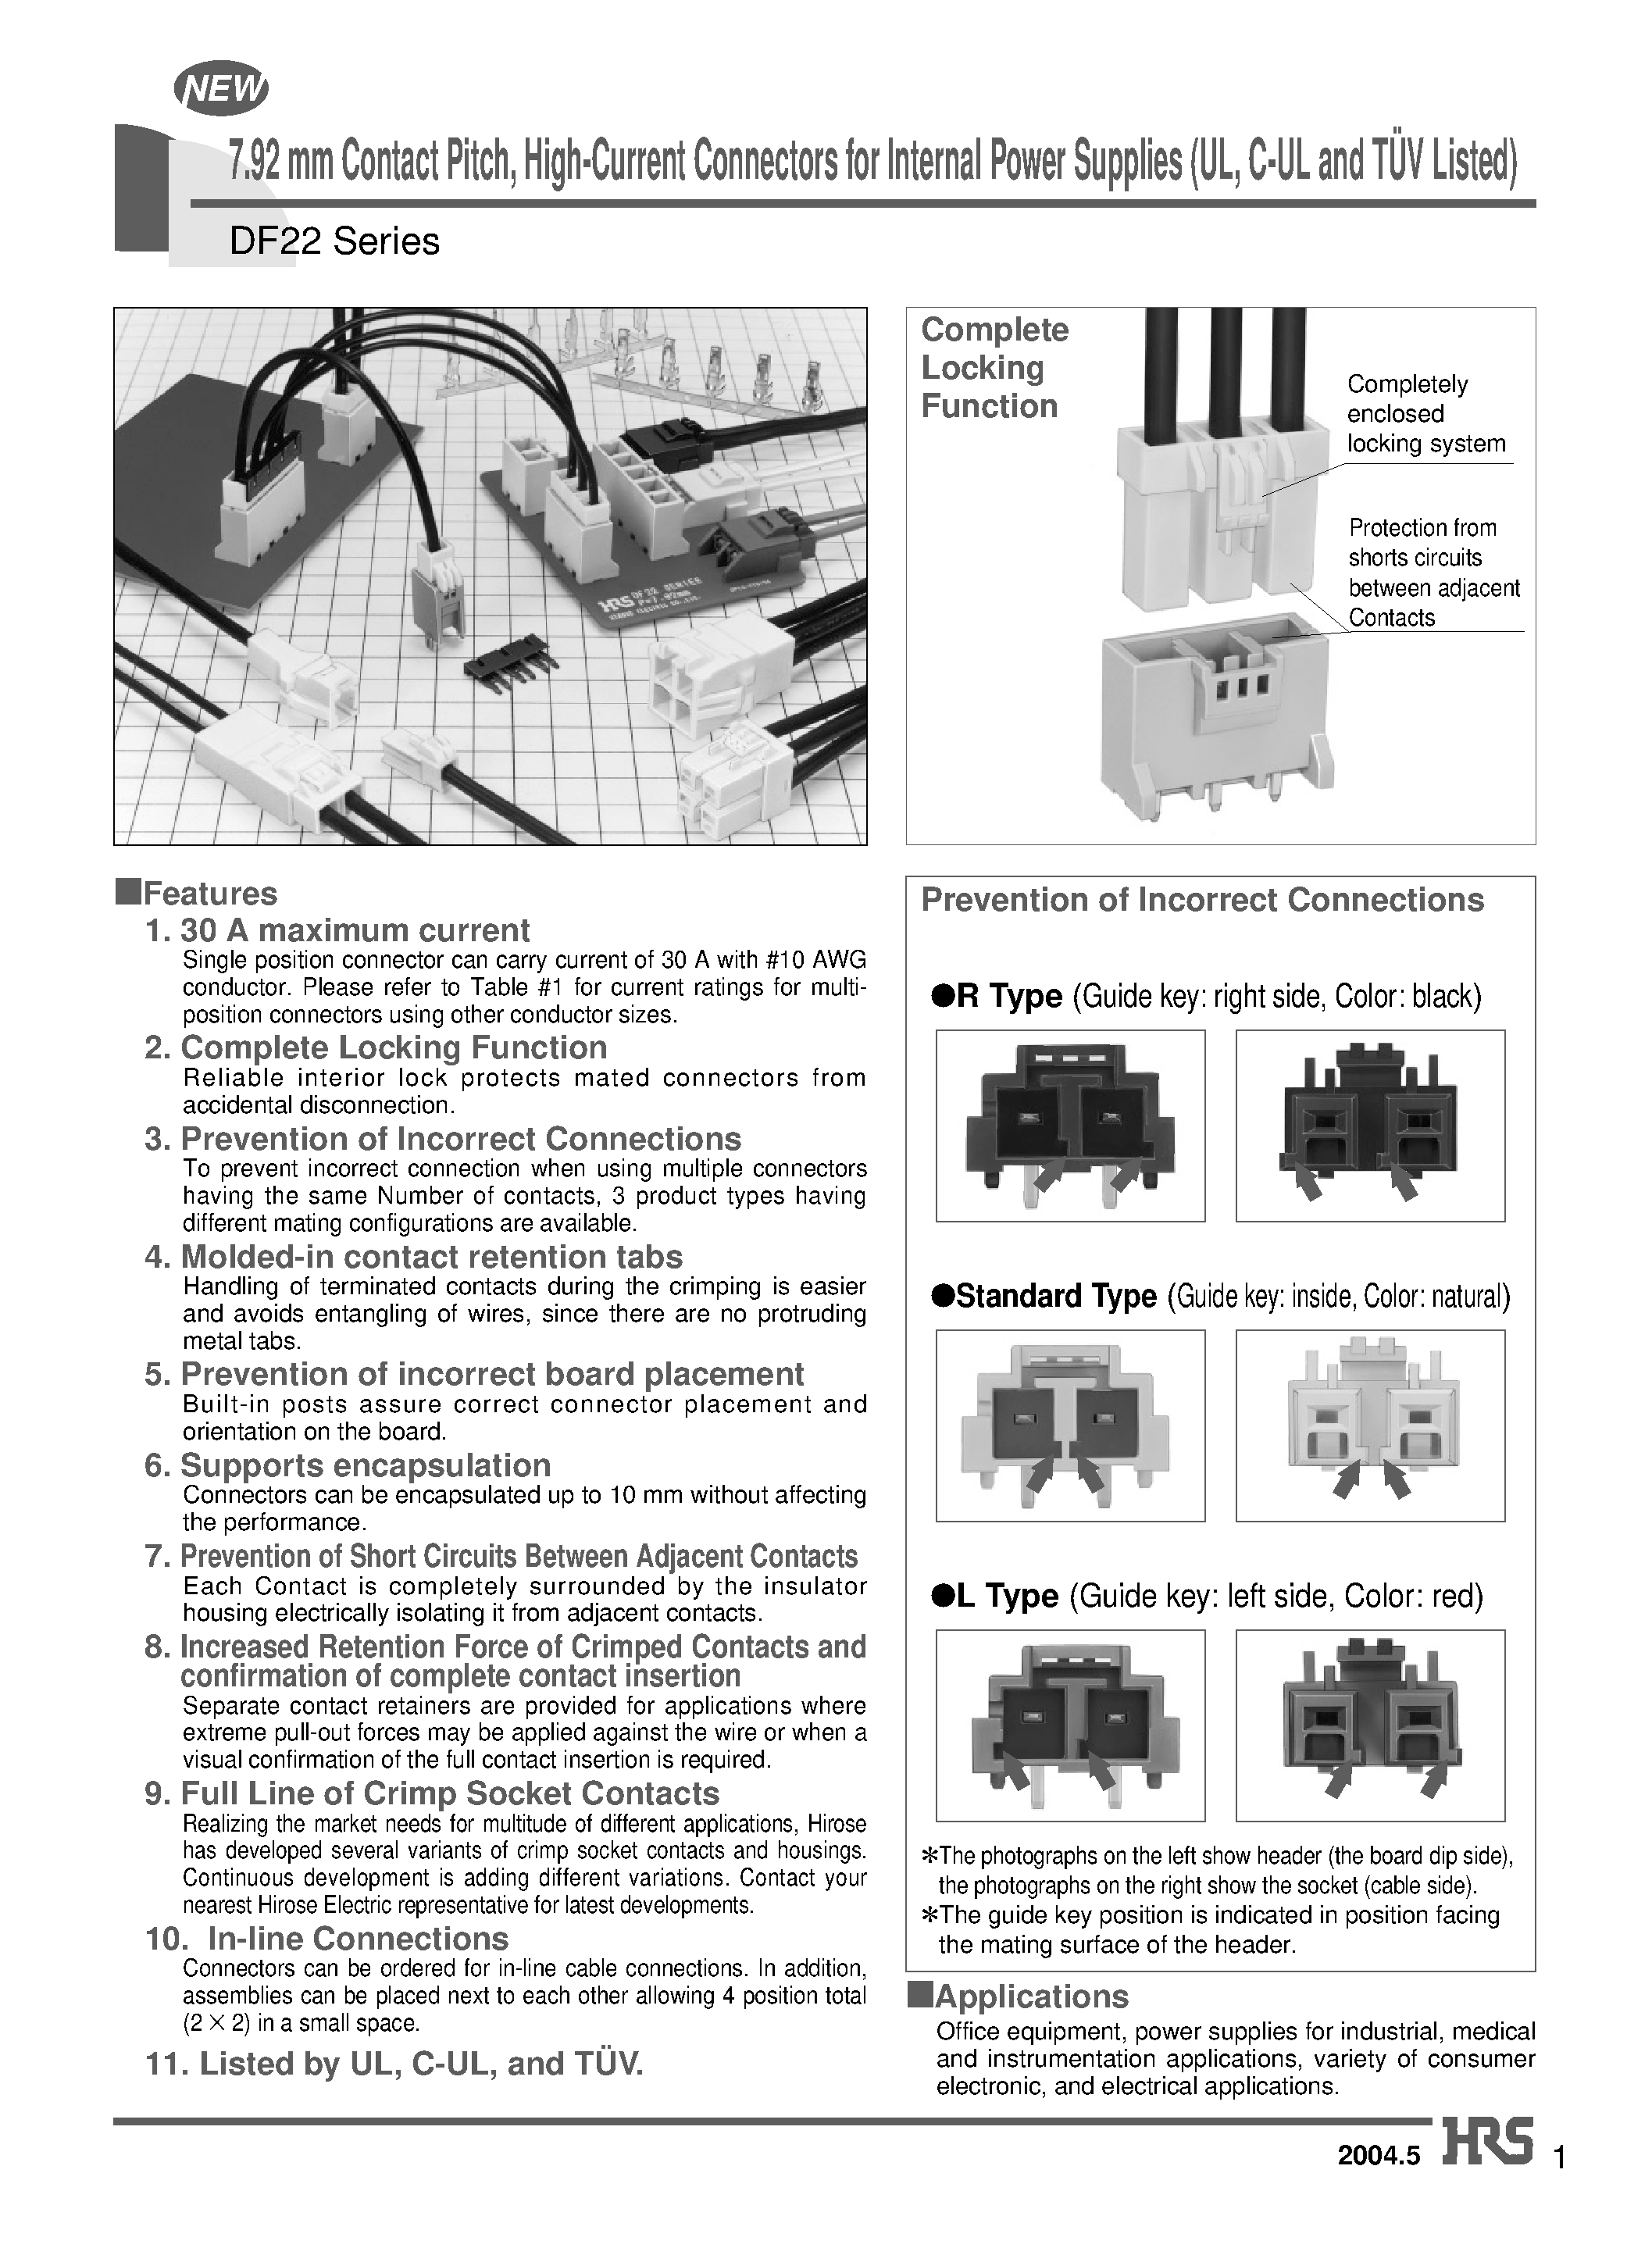 Datasheet DF22-5S-7.92DSA - 7.92 mm Contact Pitch/ High-Current Connectors for Internal Power Supplies (UL/ C-UL and TUV Listed) page 1